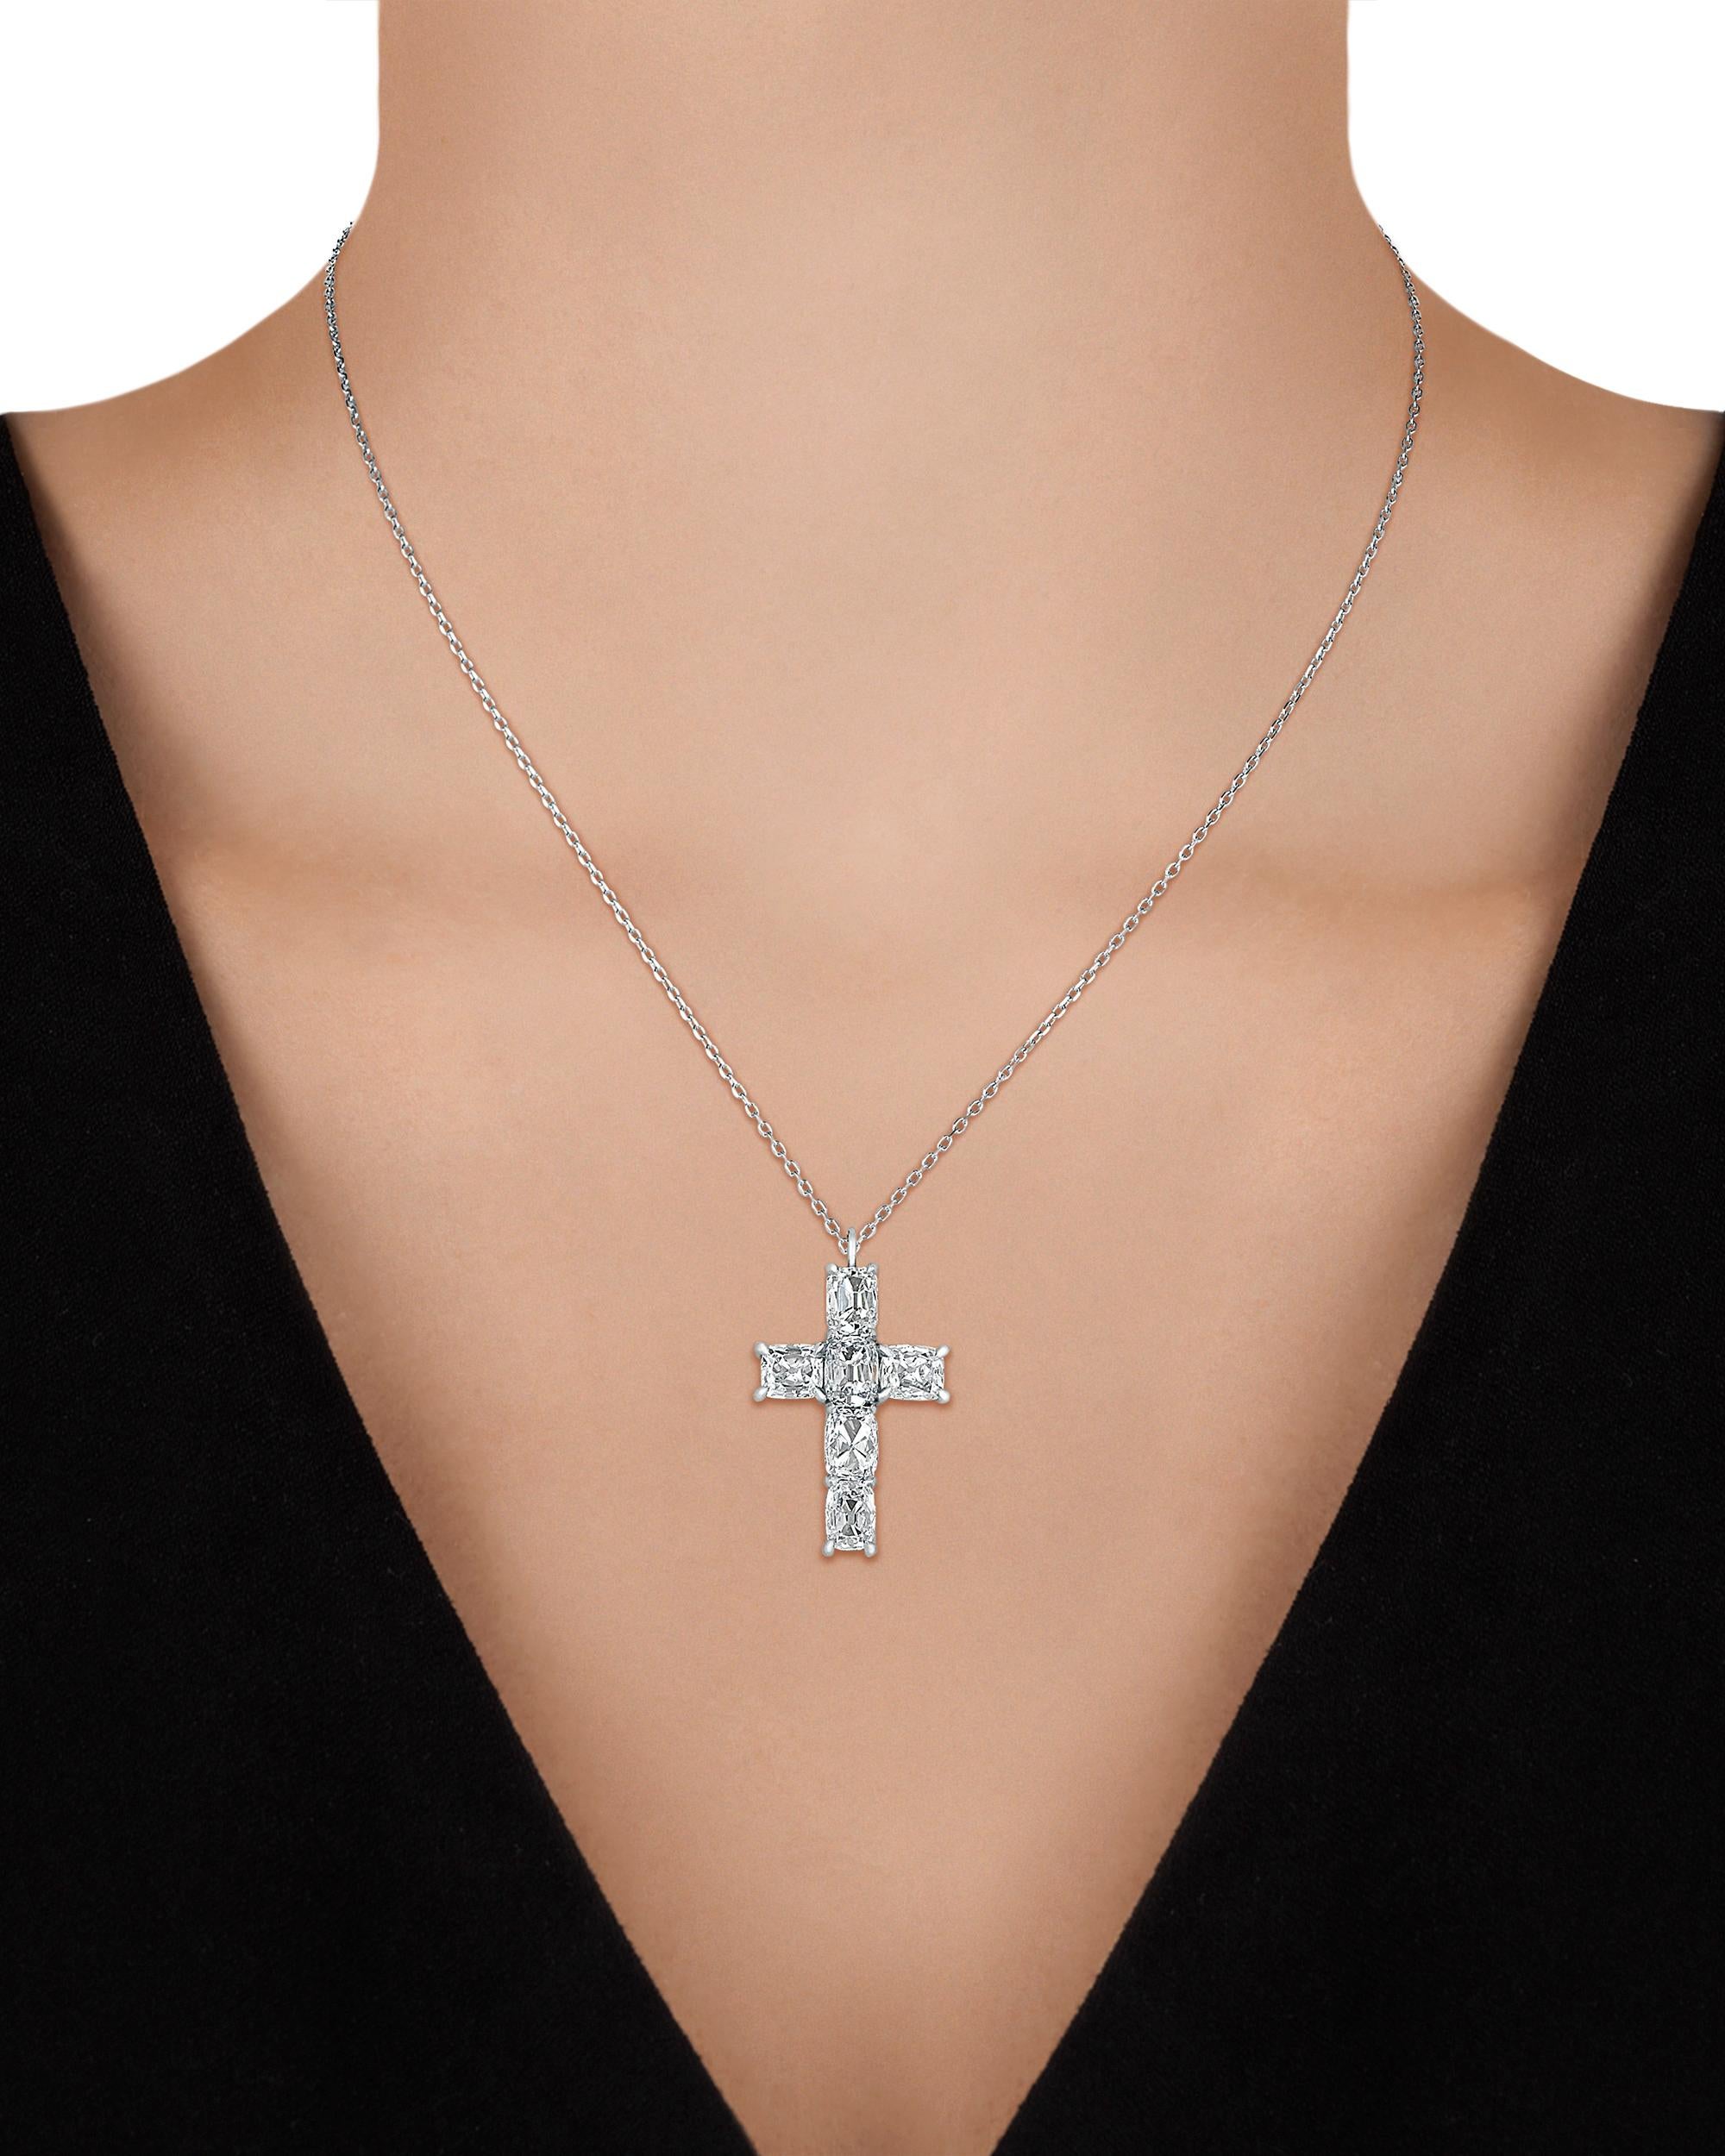 Six impeccably matched old mine-cut diamonds grace this classic cross pendant. These gems weigh a brilliant 6.11 total carats, and each is beautifully matched in size, cut and color. Set in platinum.

Pendant: 1